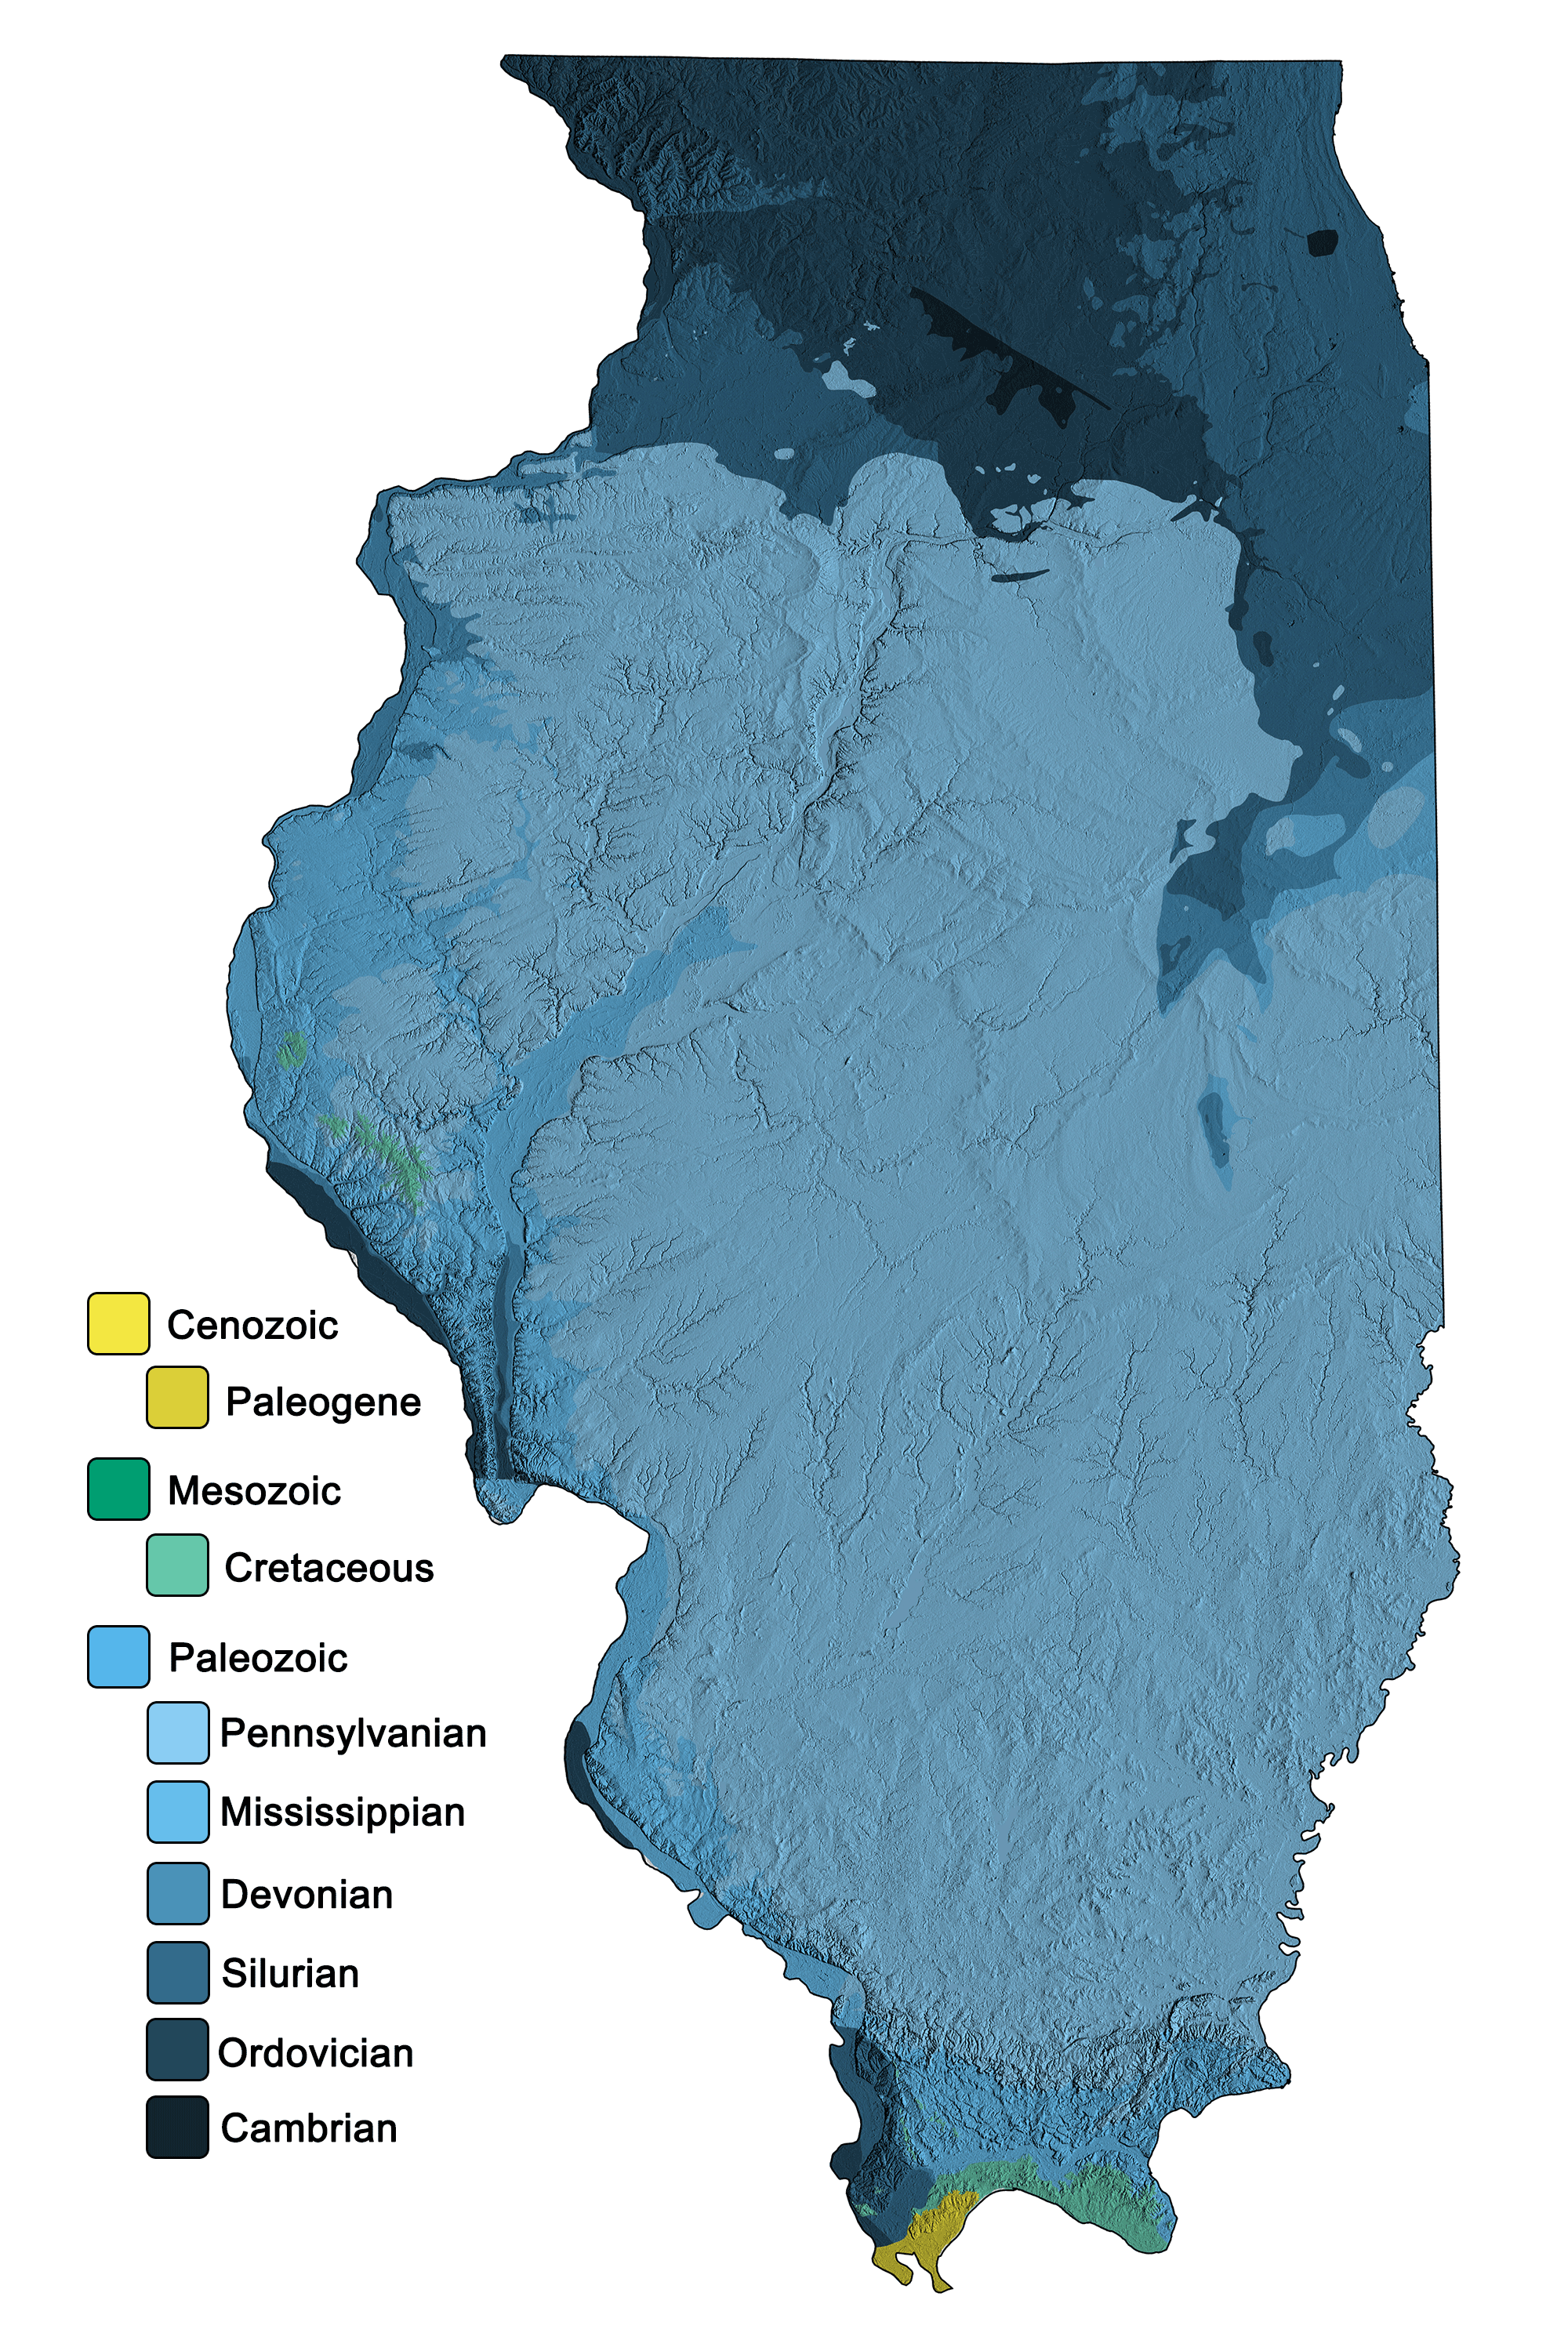 Combined geologic and topographic map of Illinois.